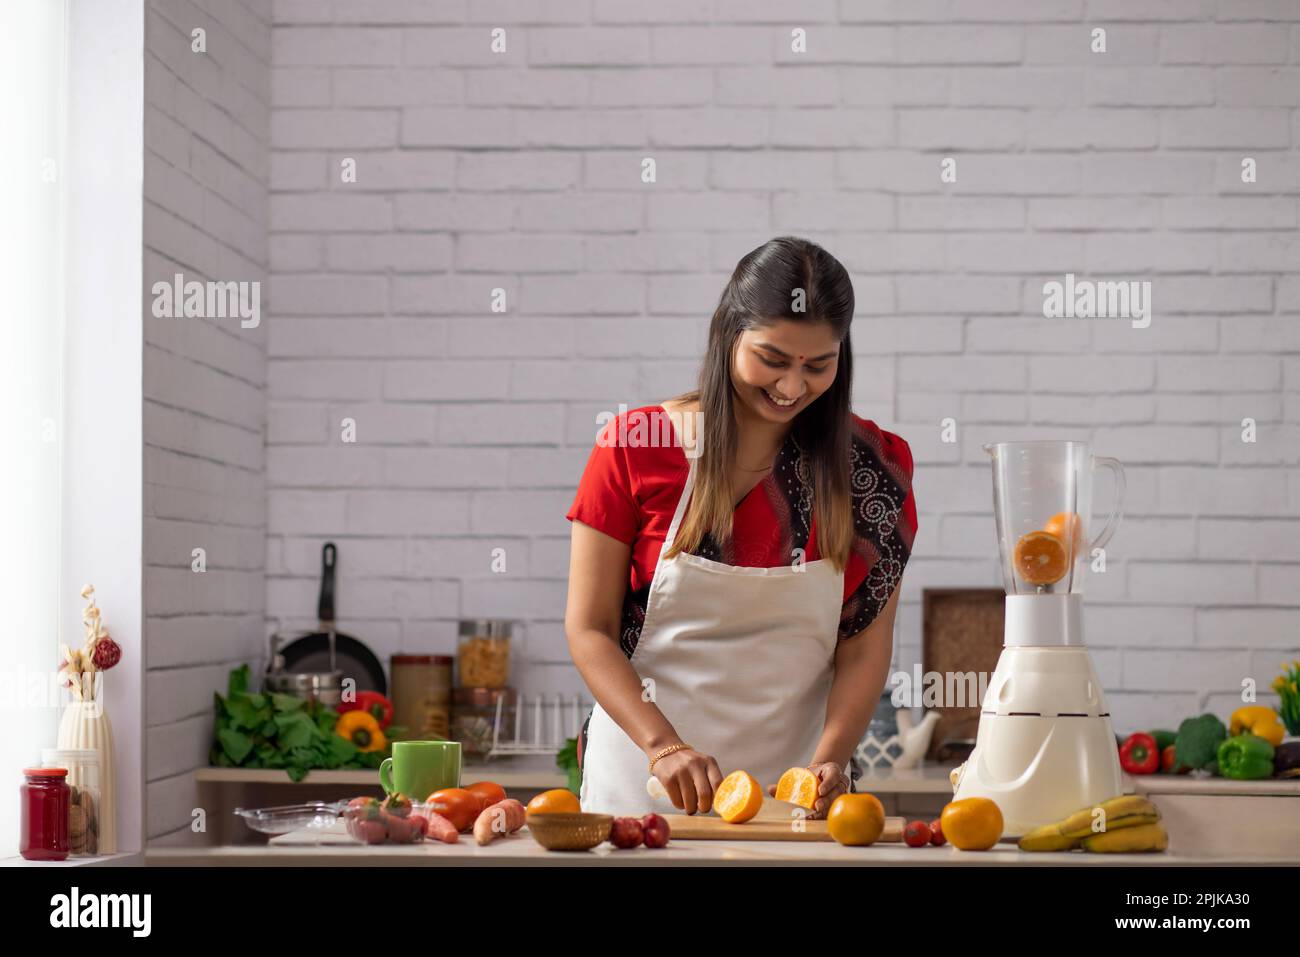 Portrait of cheerful woman chopping fresh fruit in kitchen Stock Photo